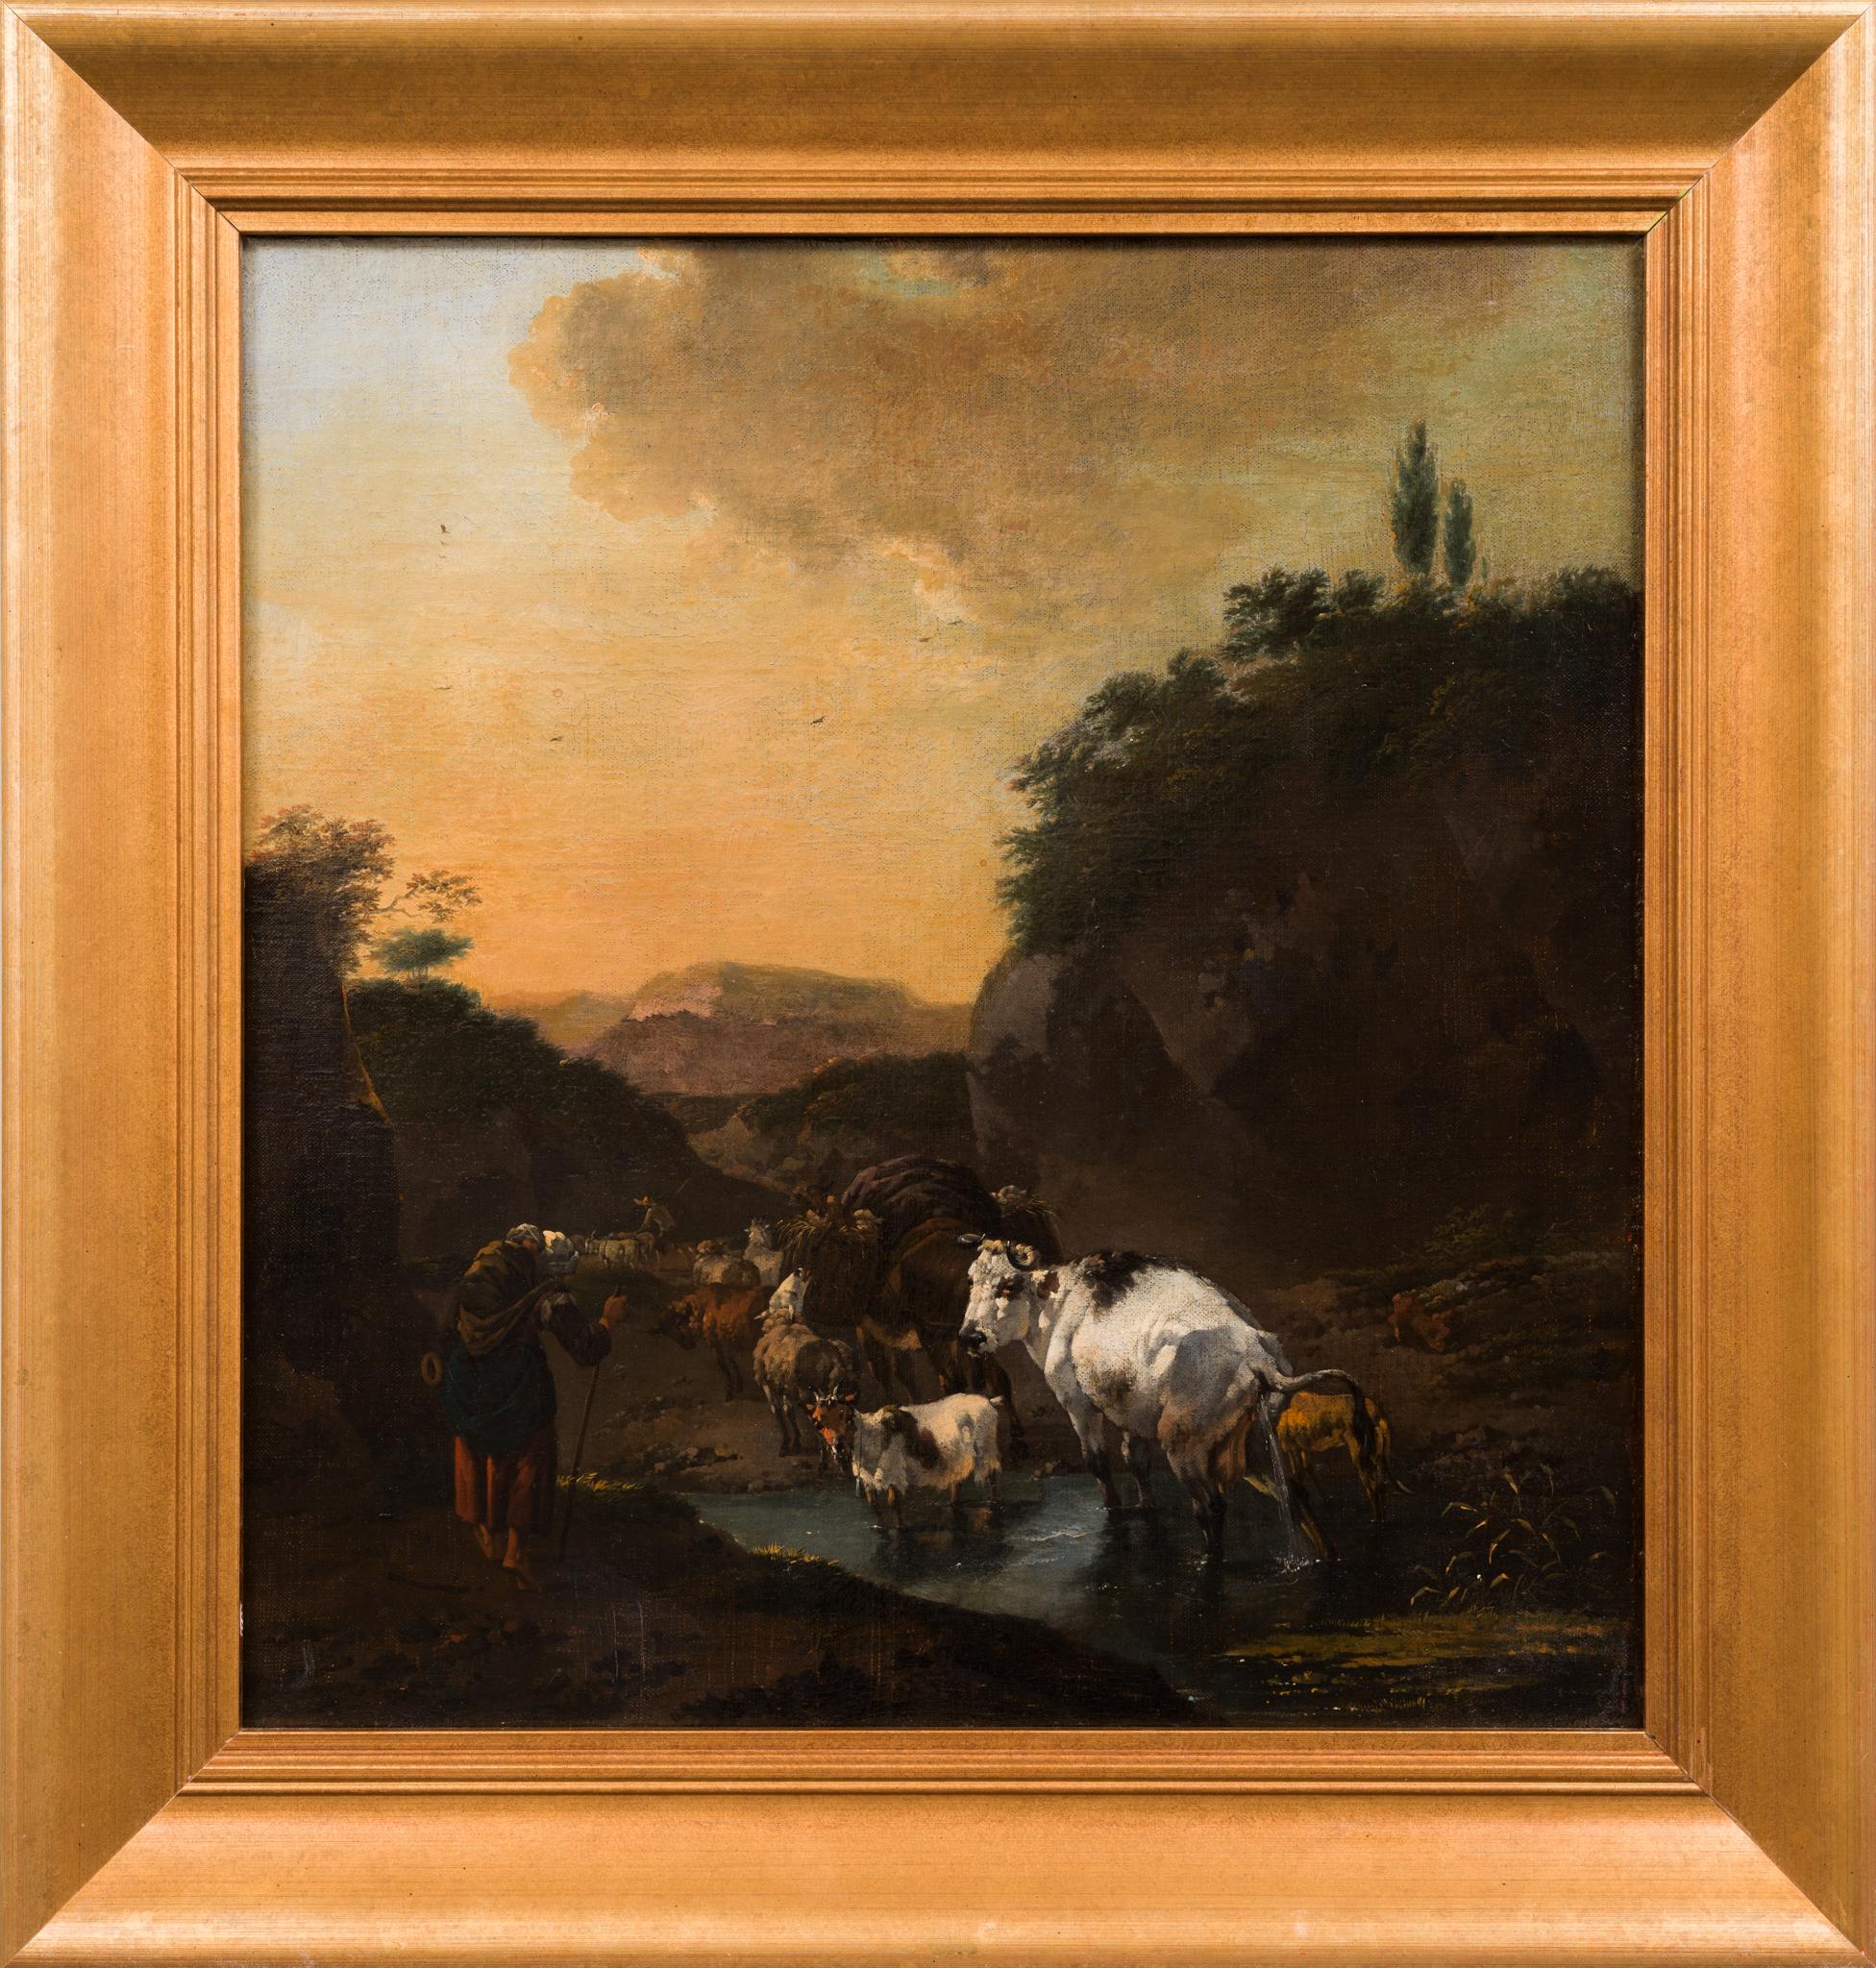 Shepherd with Sheep, Cows and a Goat in a Landscape by Jan Frans Soolmaker